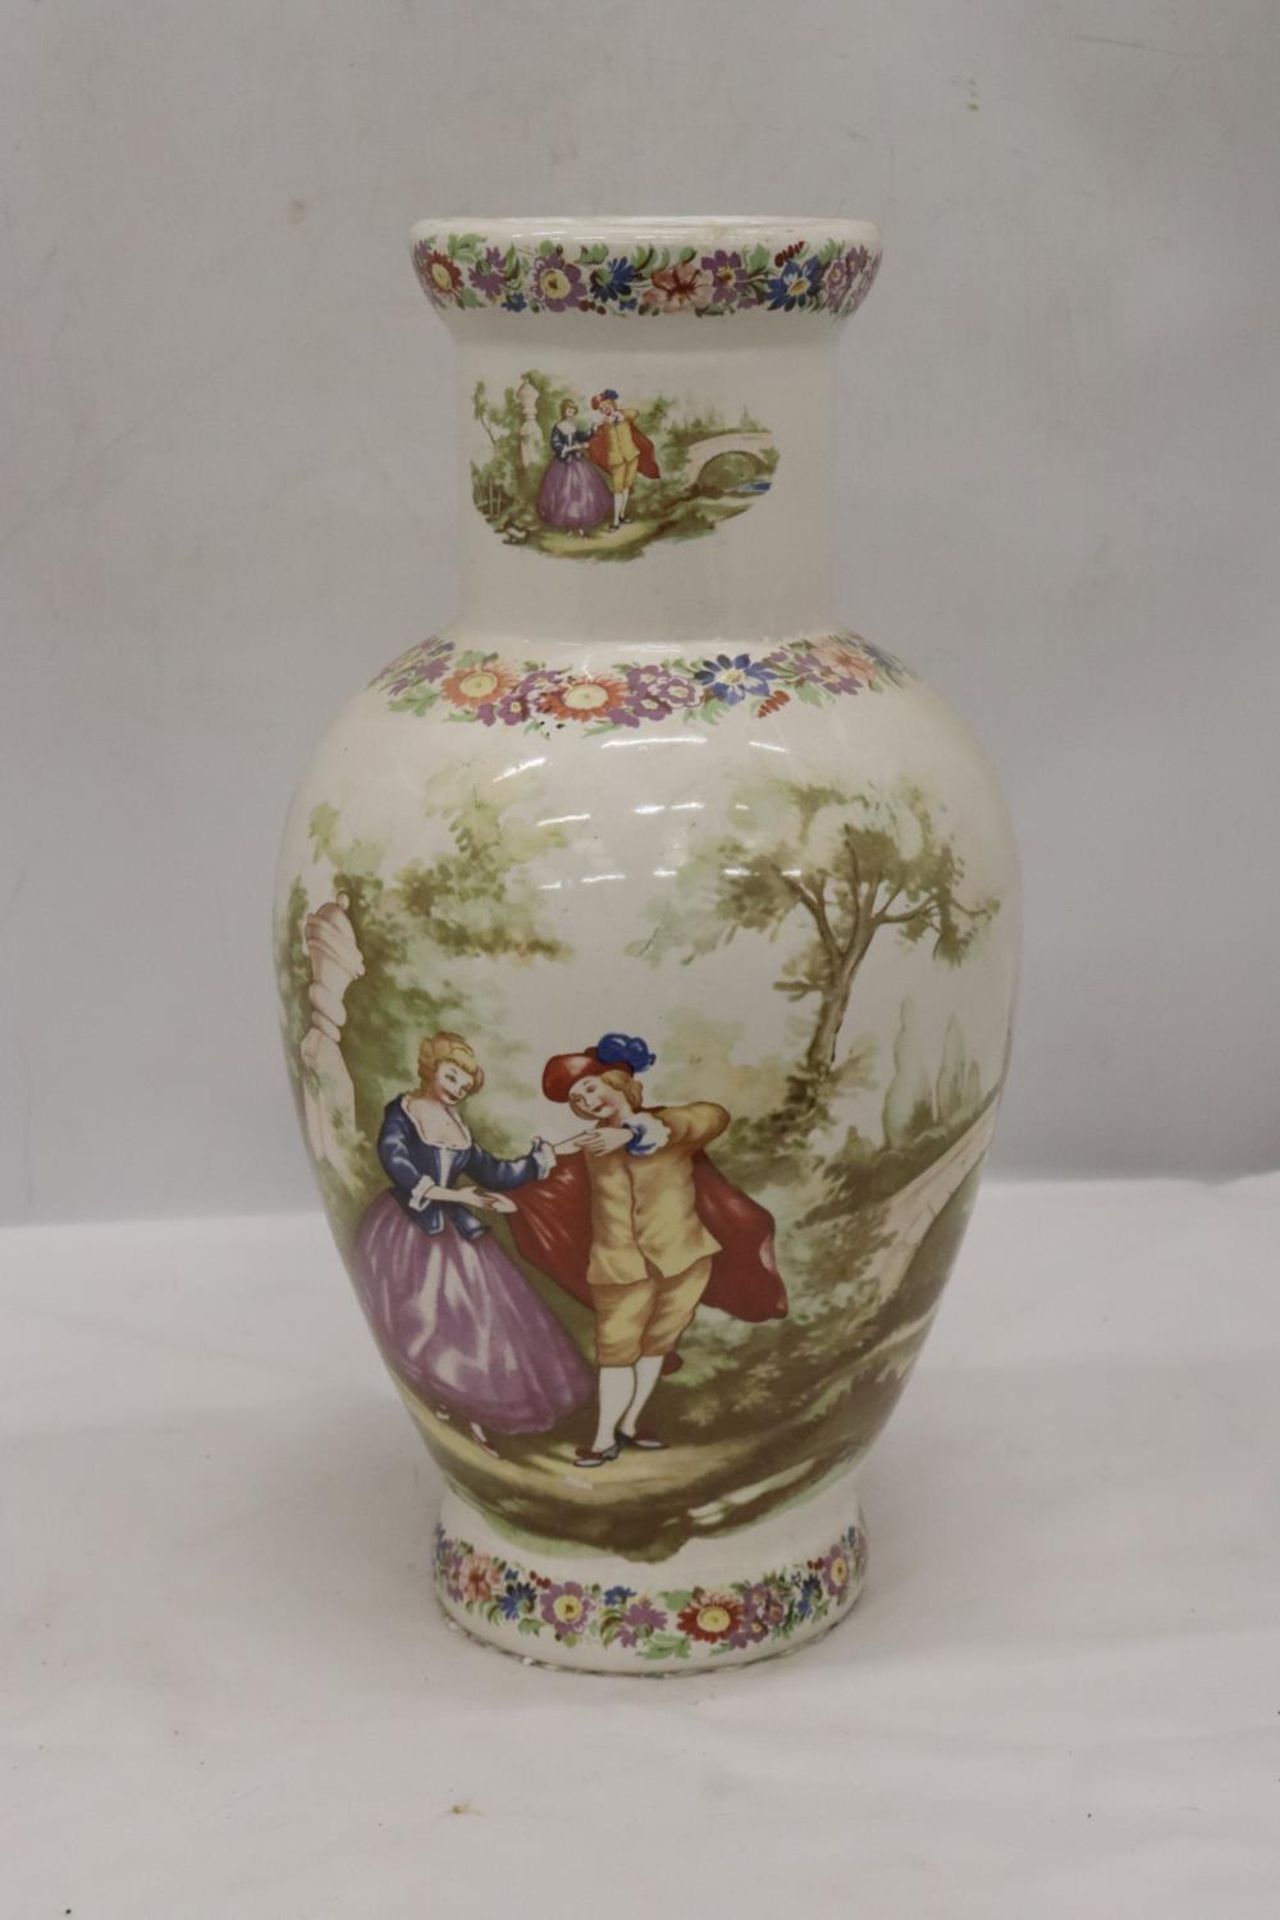 A LARGE VICTORIAN STYLE VASE WITH TRANSFER PRINTED PRINT, HEIGHT 37CM